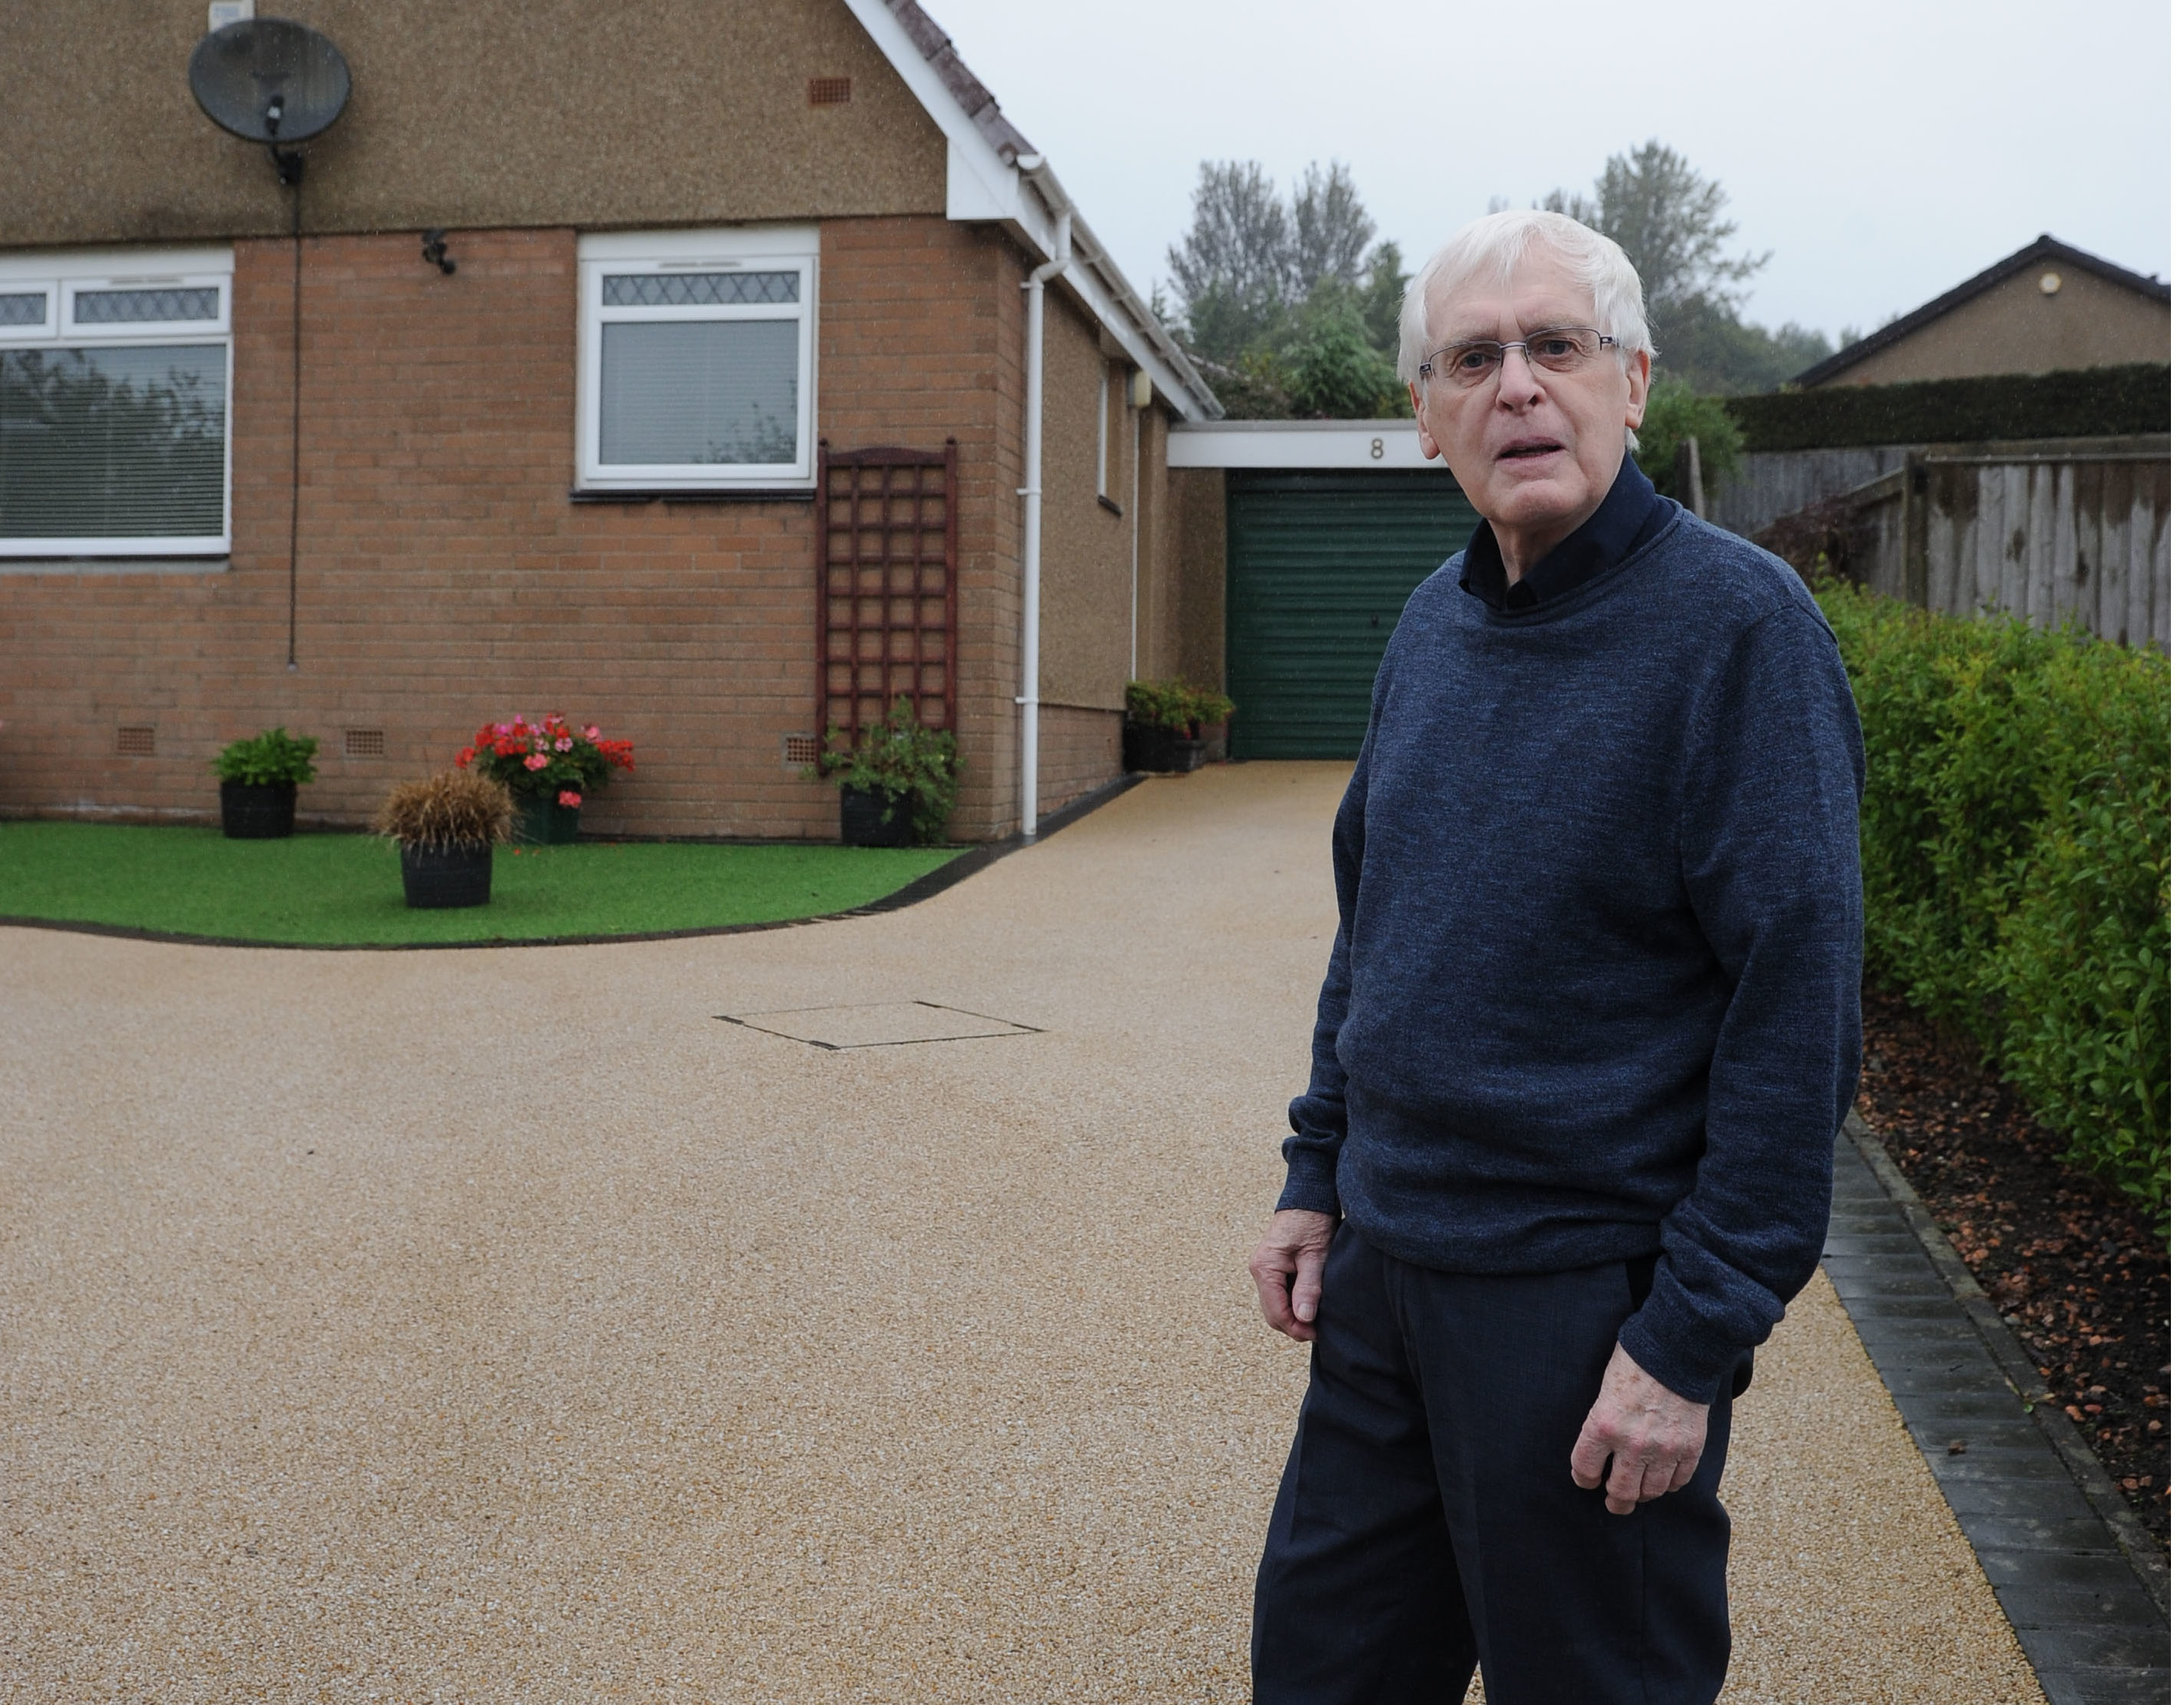 Douglas Paton paid £6k for a new driveway to be laid - but cheap material was used by a firm of "belligerent local cowboys" and the driveway surface has discoloured and is getting worse.